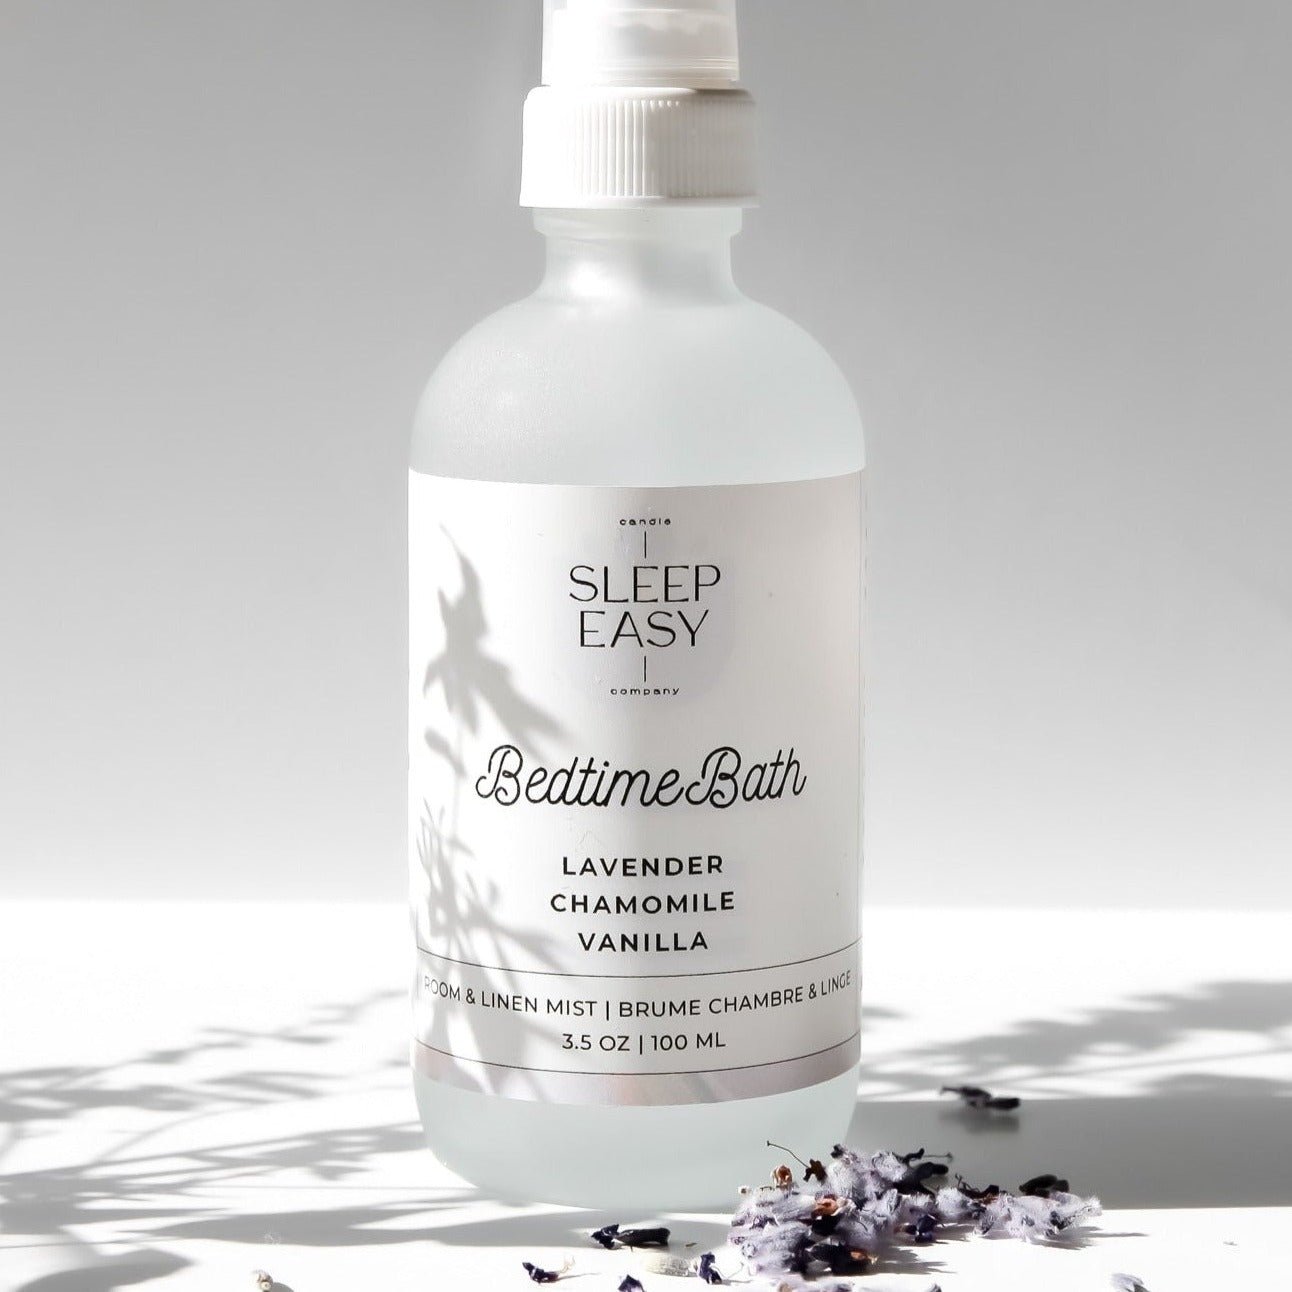 Bedtime bath room spray, best room spray, best selling room spray, home fragrance, lavender room spray, vanilla room spray, chamomile, relaxing room spray, linen mist, fresh linen mist, frosted bottle displayed on a white background, air fresheners & deodorizers